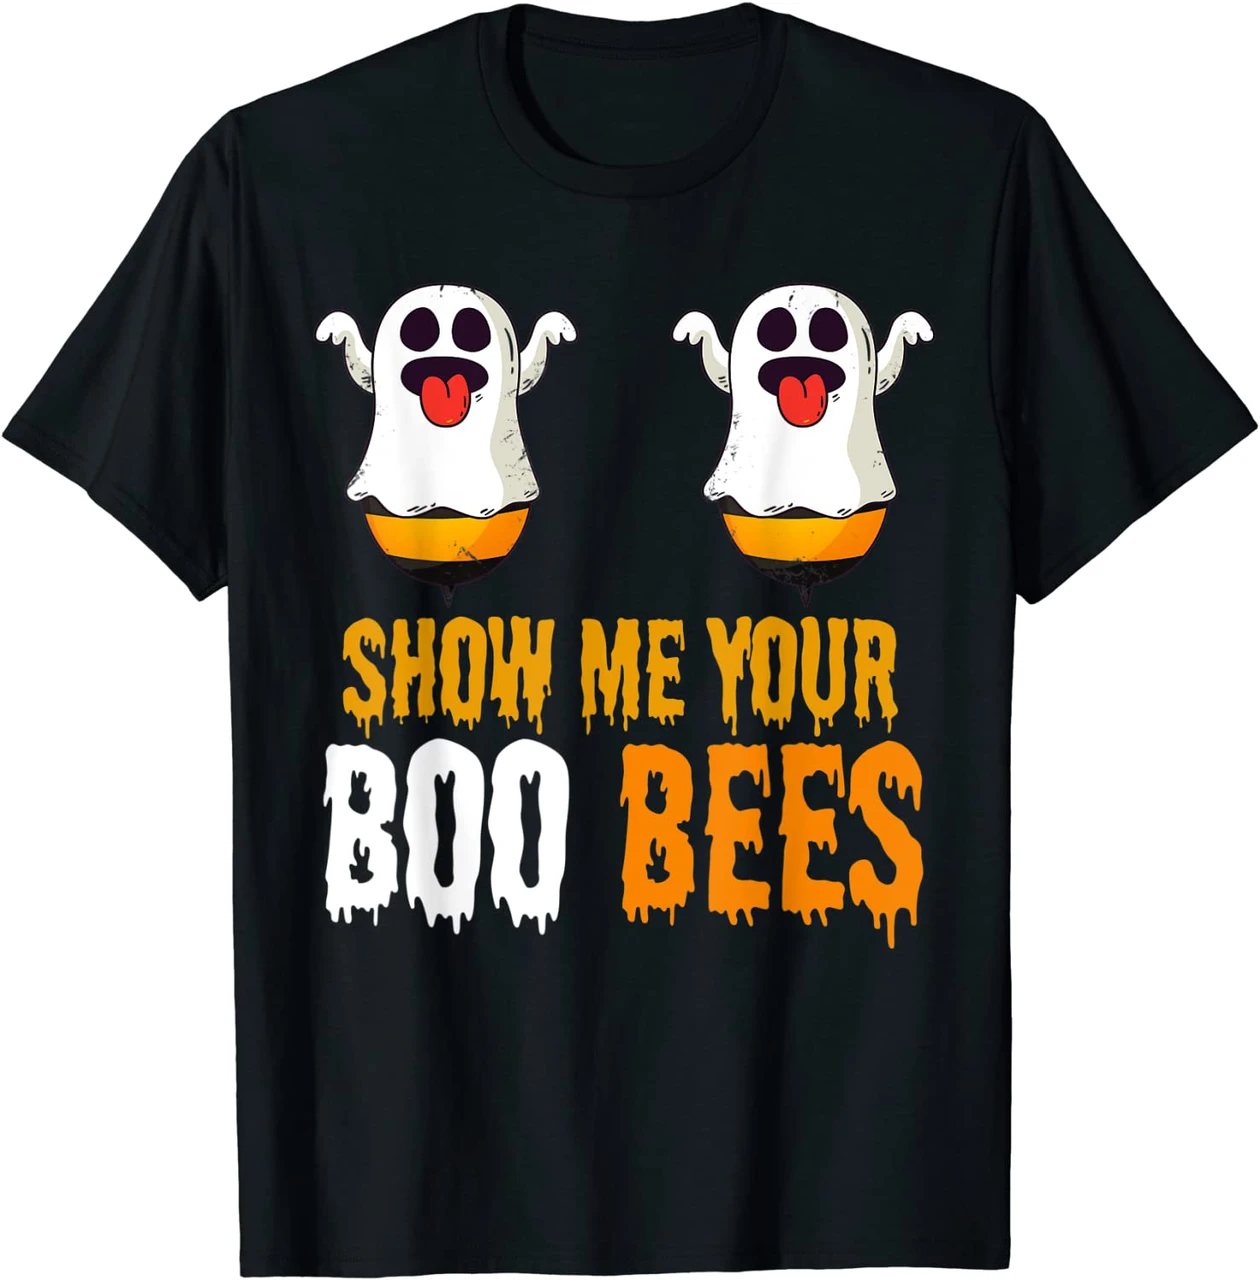 Show Me Your Boo Bees Shirt